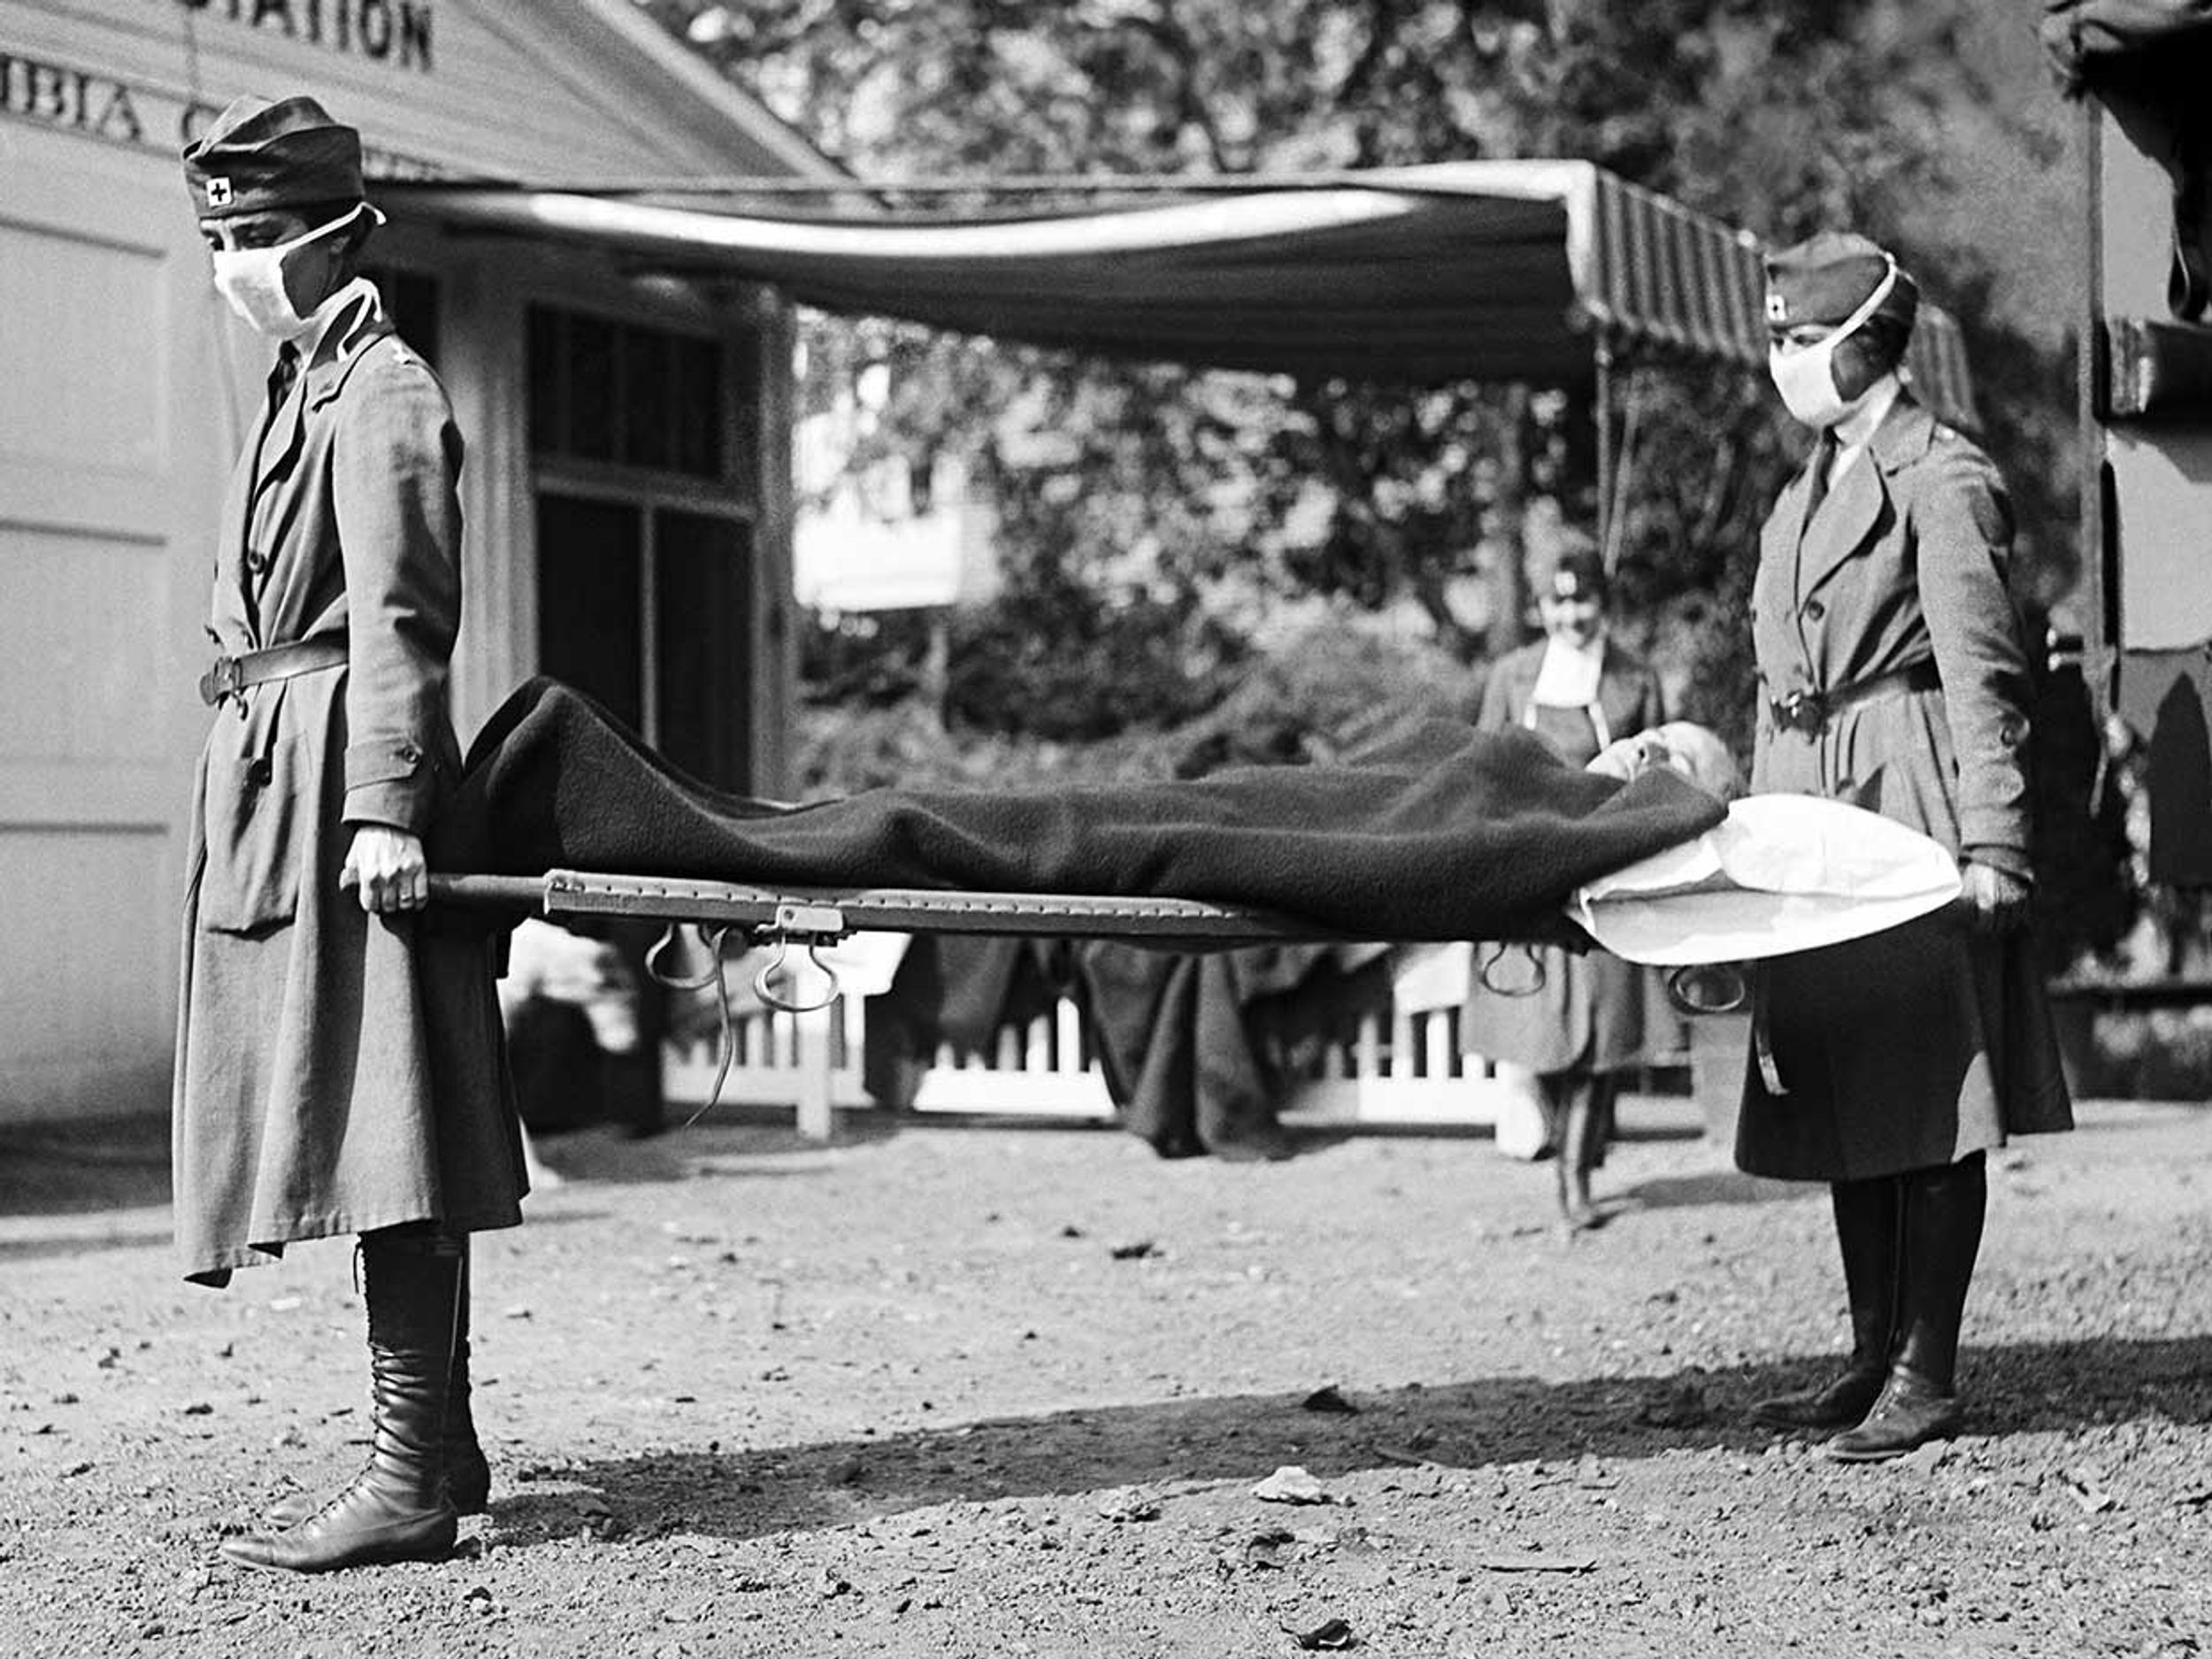 Two Red Cross nurses with a person on a stretcher during a demonstration at the Red Cross Emergency Ambulance Station during the influenza pandemic of 1918-1920, Washington DC, 1918.